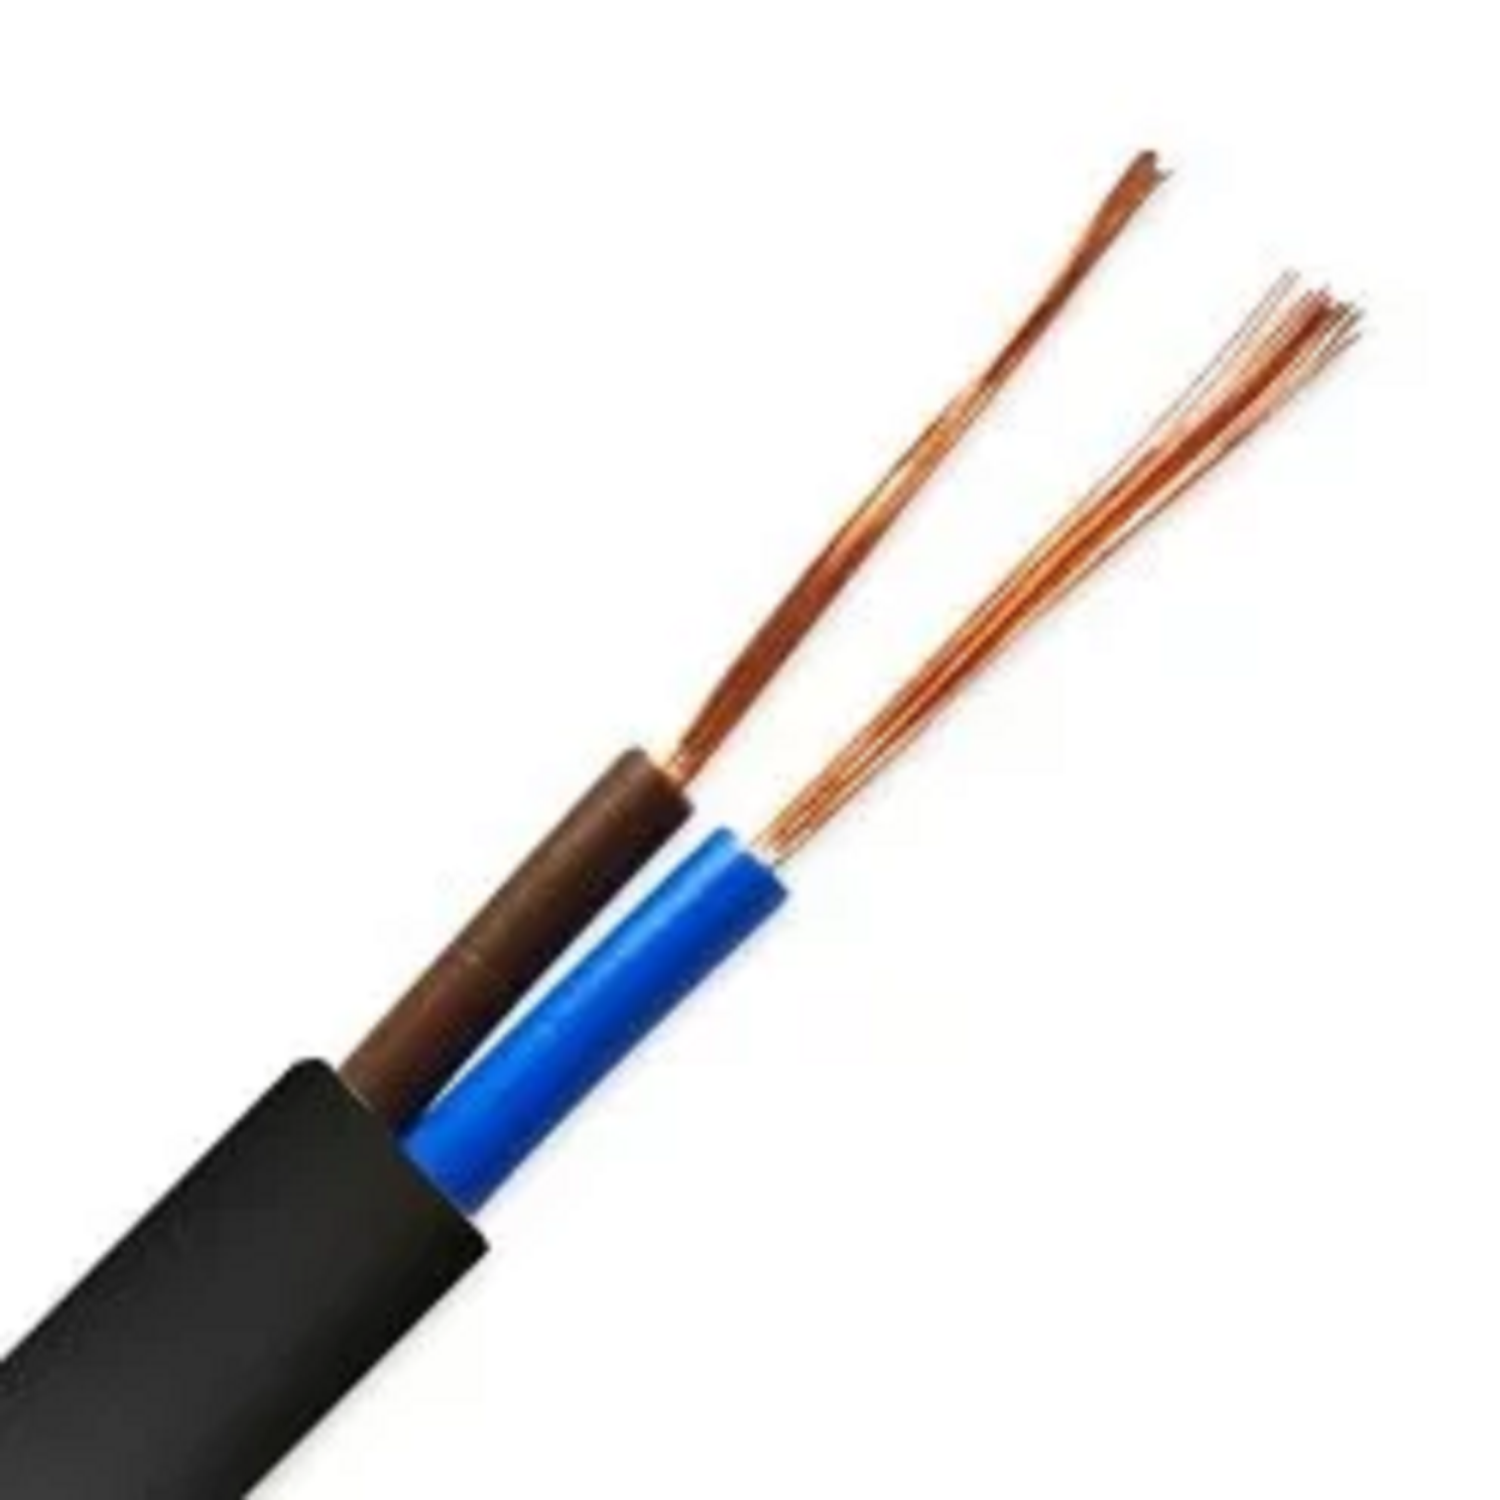 0.75 Sqmm Finolex Copper Flexible Cable With PVC Insulated For Domestic 38 Industrial Uses